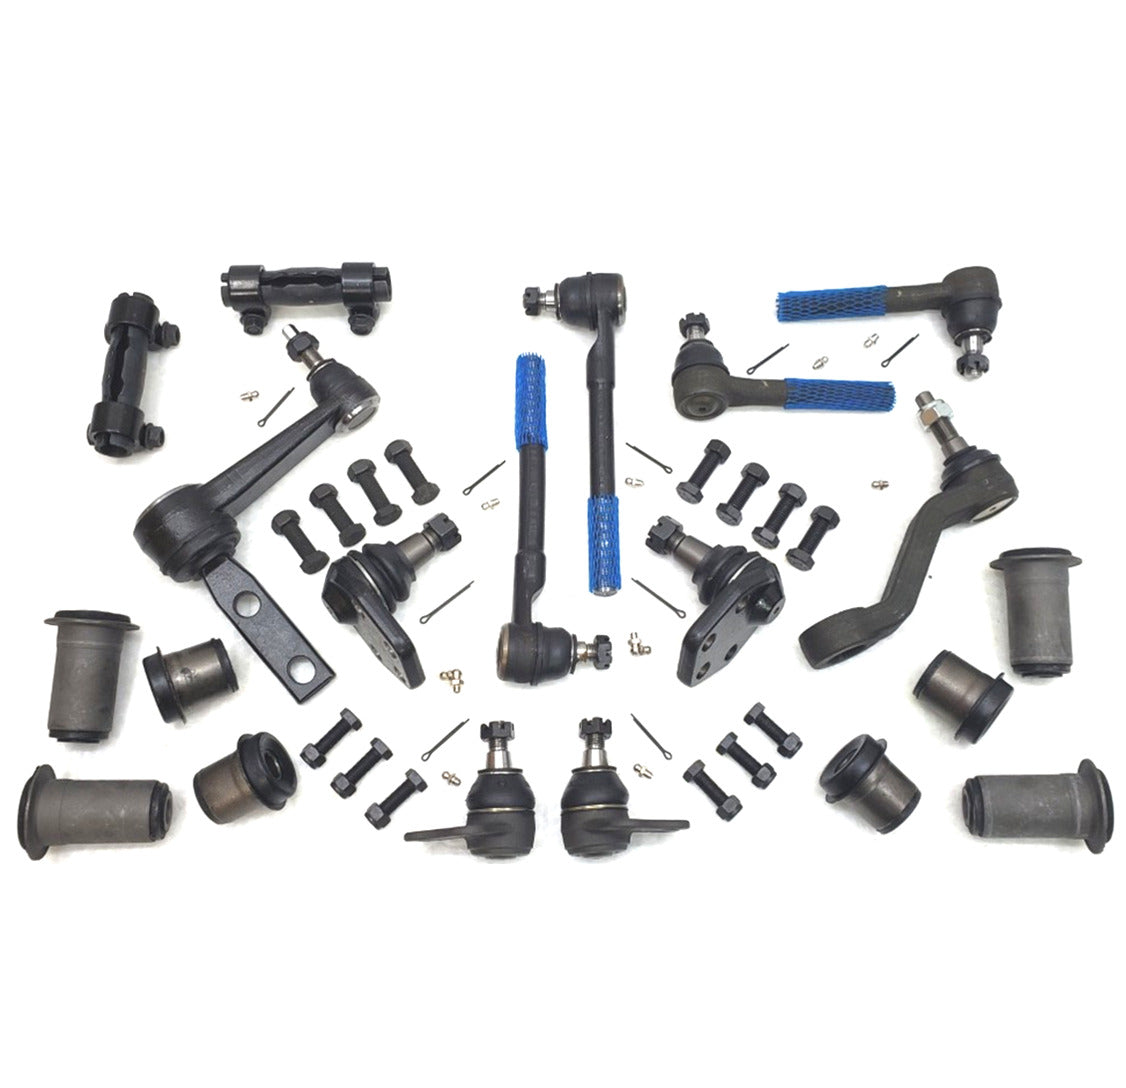 HD Ball Joint Tie Rod Control Arm Bushing Kit for 2000-2002 Dodge Ram 2500, 3500 2WD